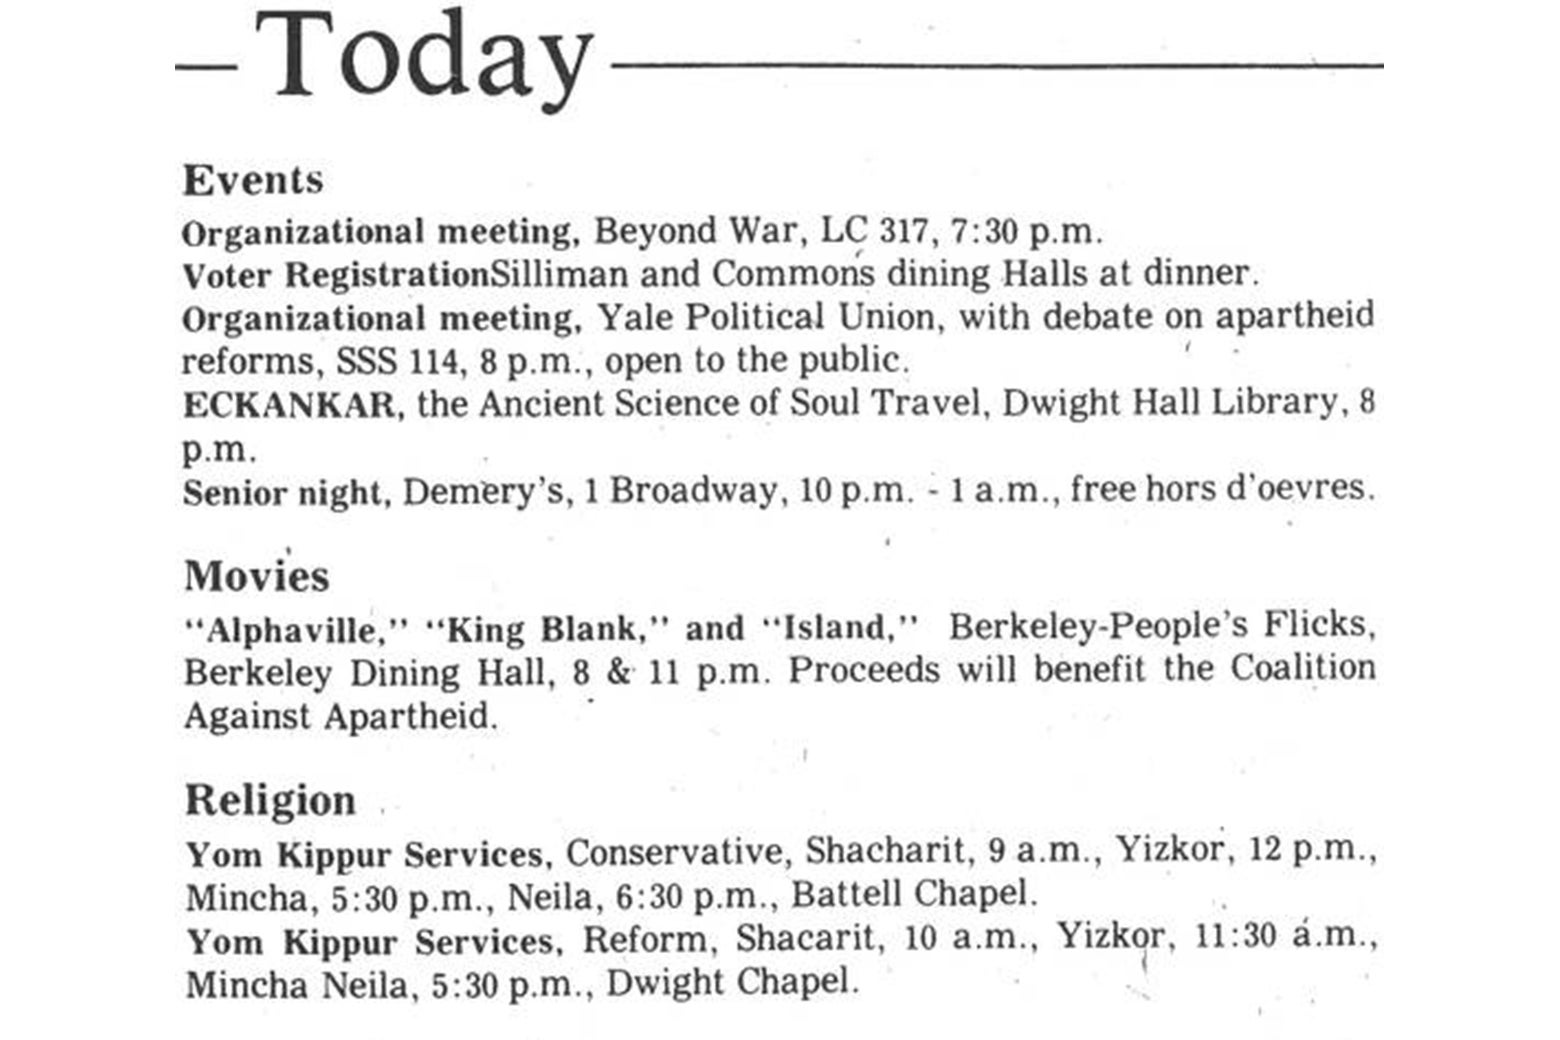 A list of campus events from the Yale Daily News, including hor d'ouevres at Demery's.